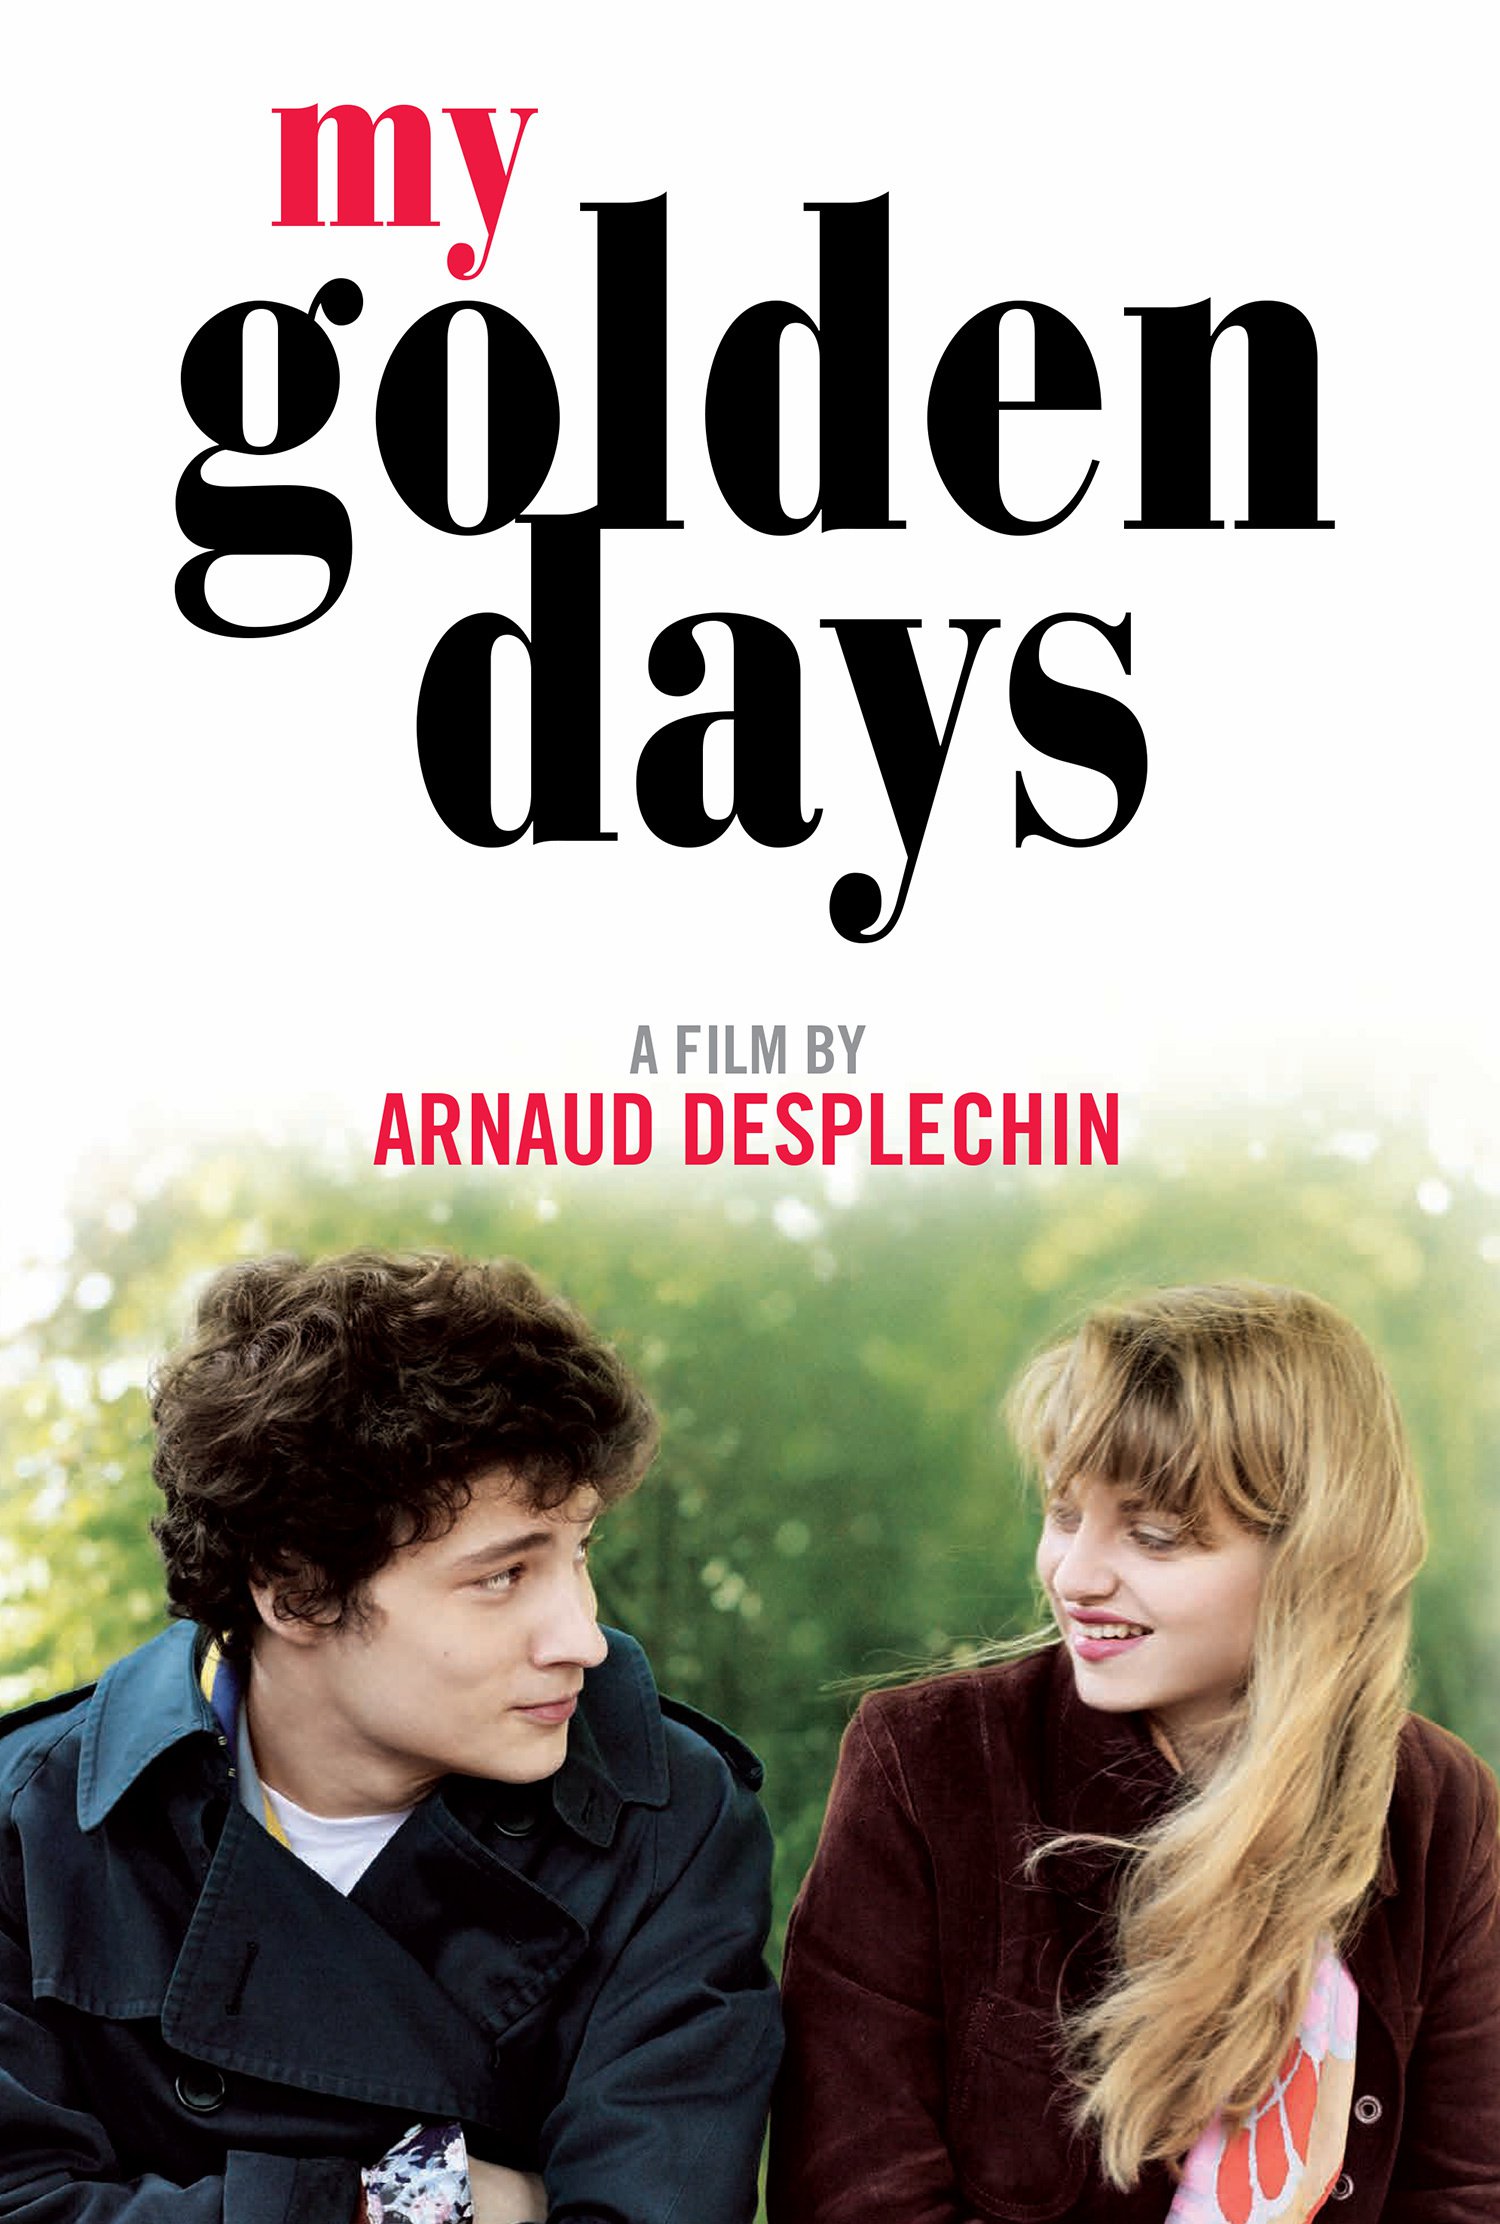 [NYFF Review] My Golden Days